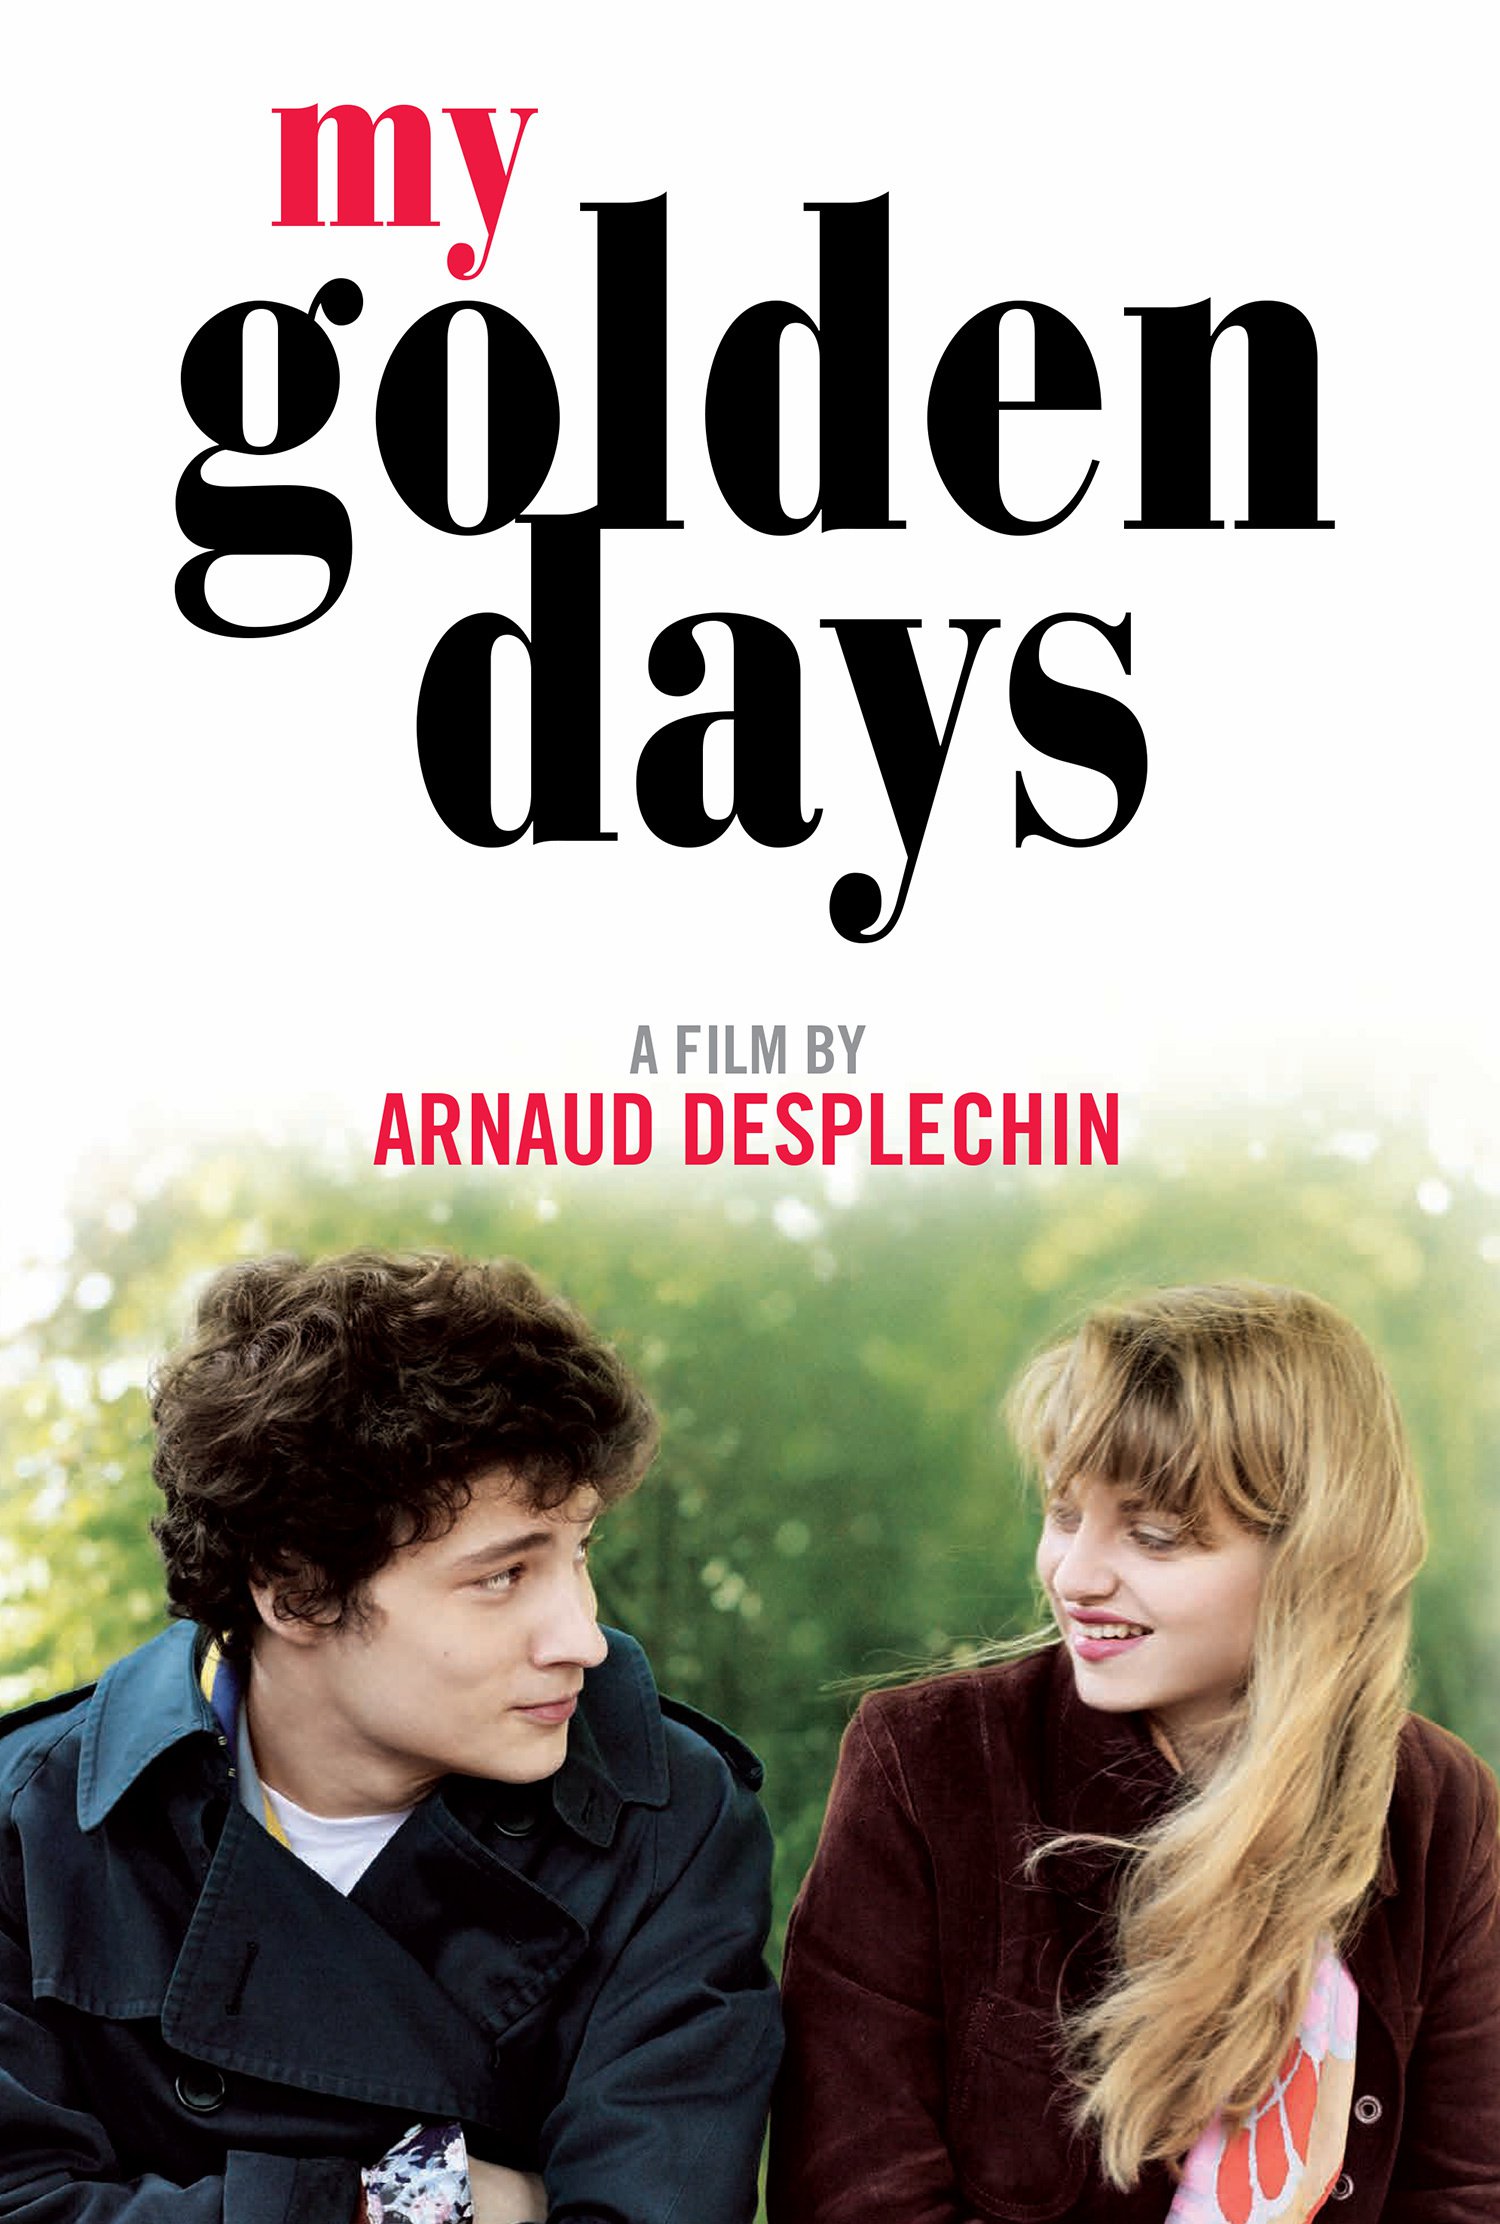 [NYFF Review] My Golden Days